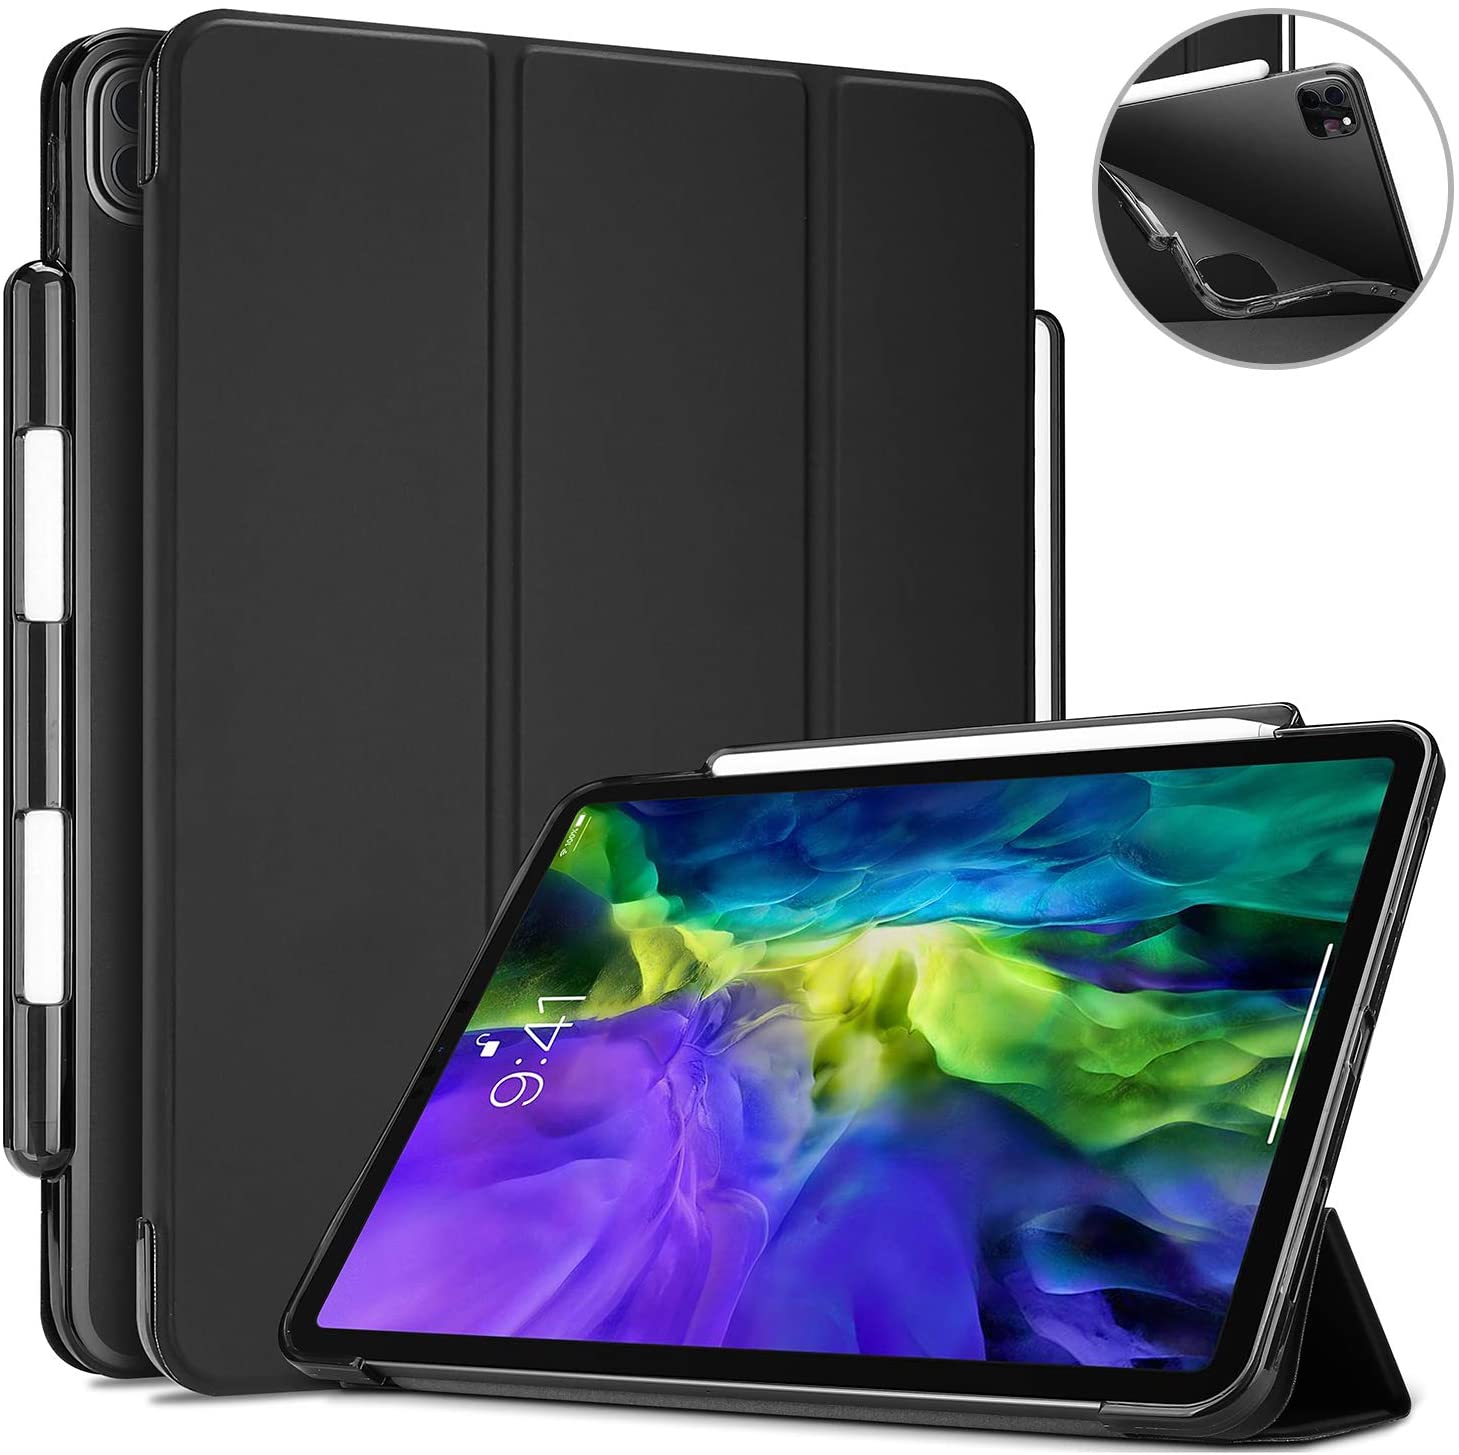 iPad Pro 11 2nd 2020/1st Generation 2018 Slim Case with pencil holder